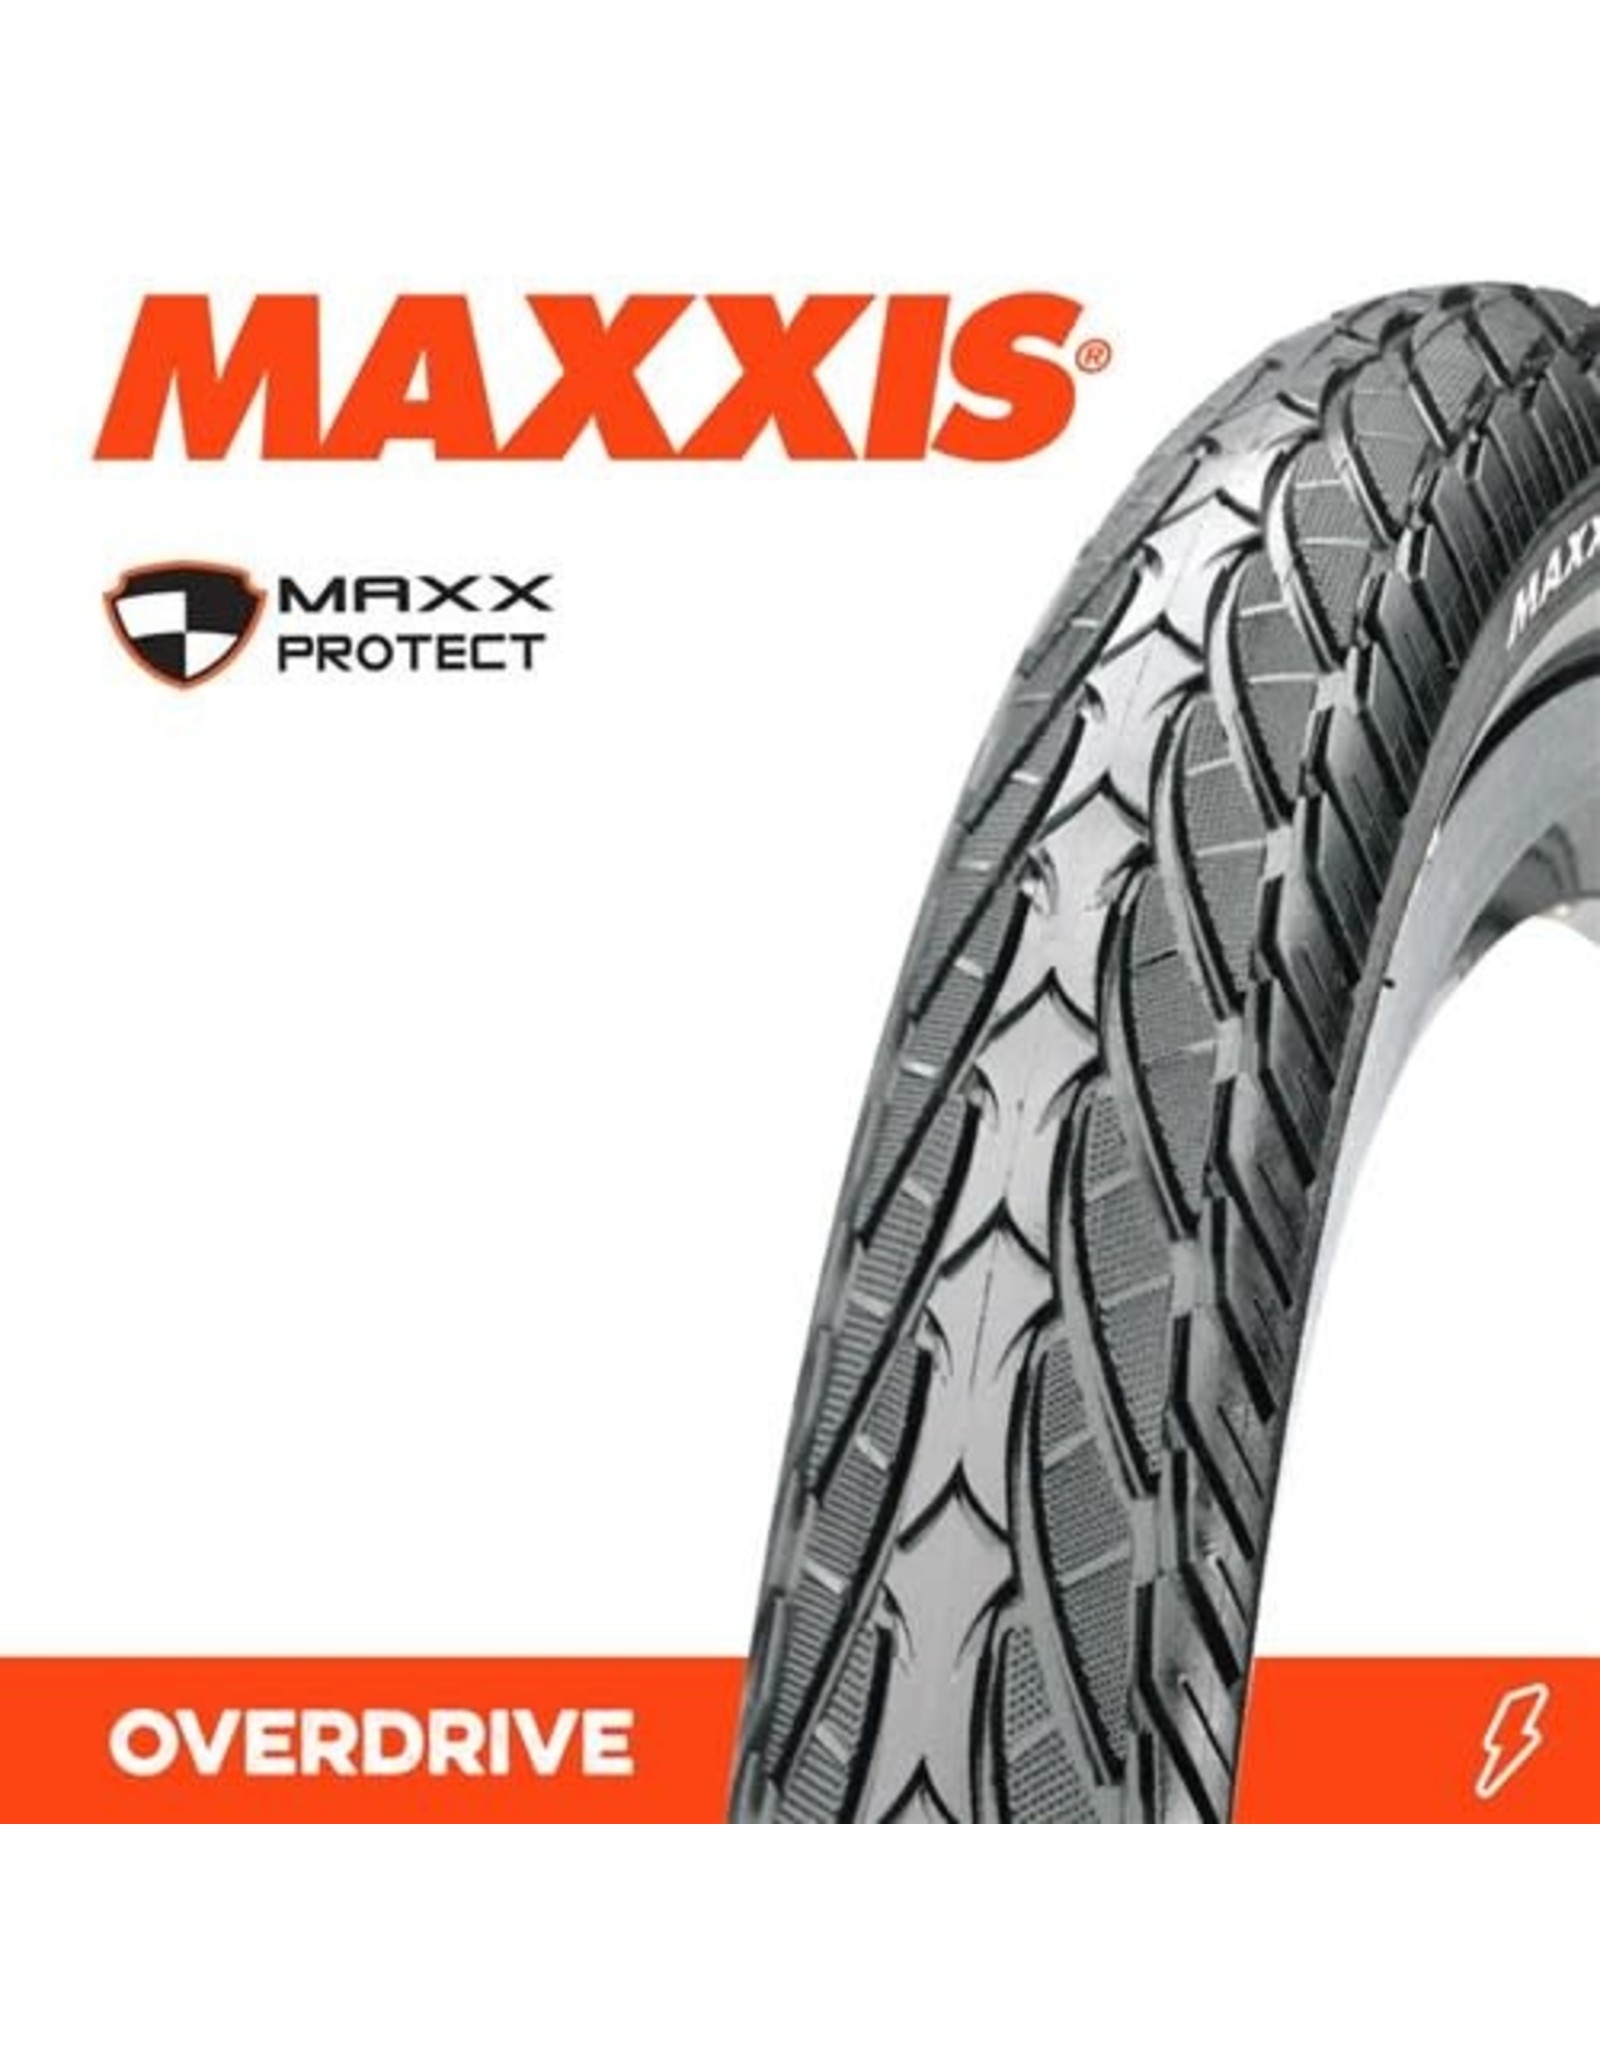 MAXXIS MAXXIS OVERDRIVE 700 X 40C MAXX PROTECT WIRE 27 TPI TYRE